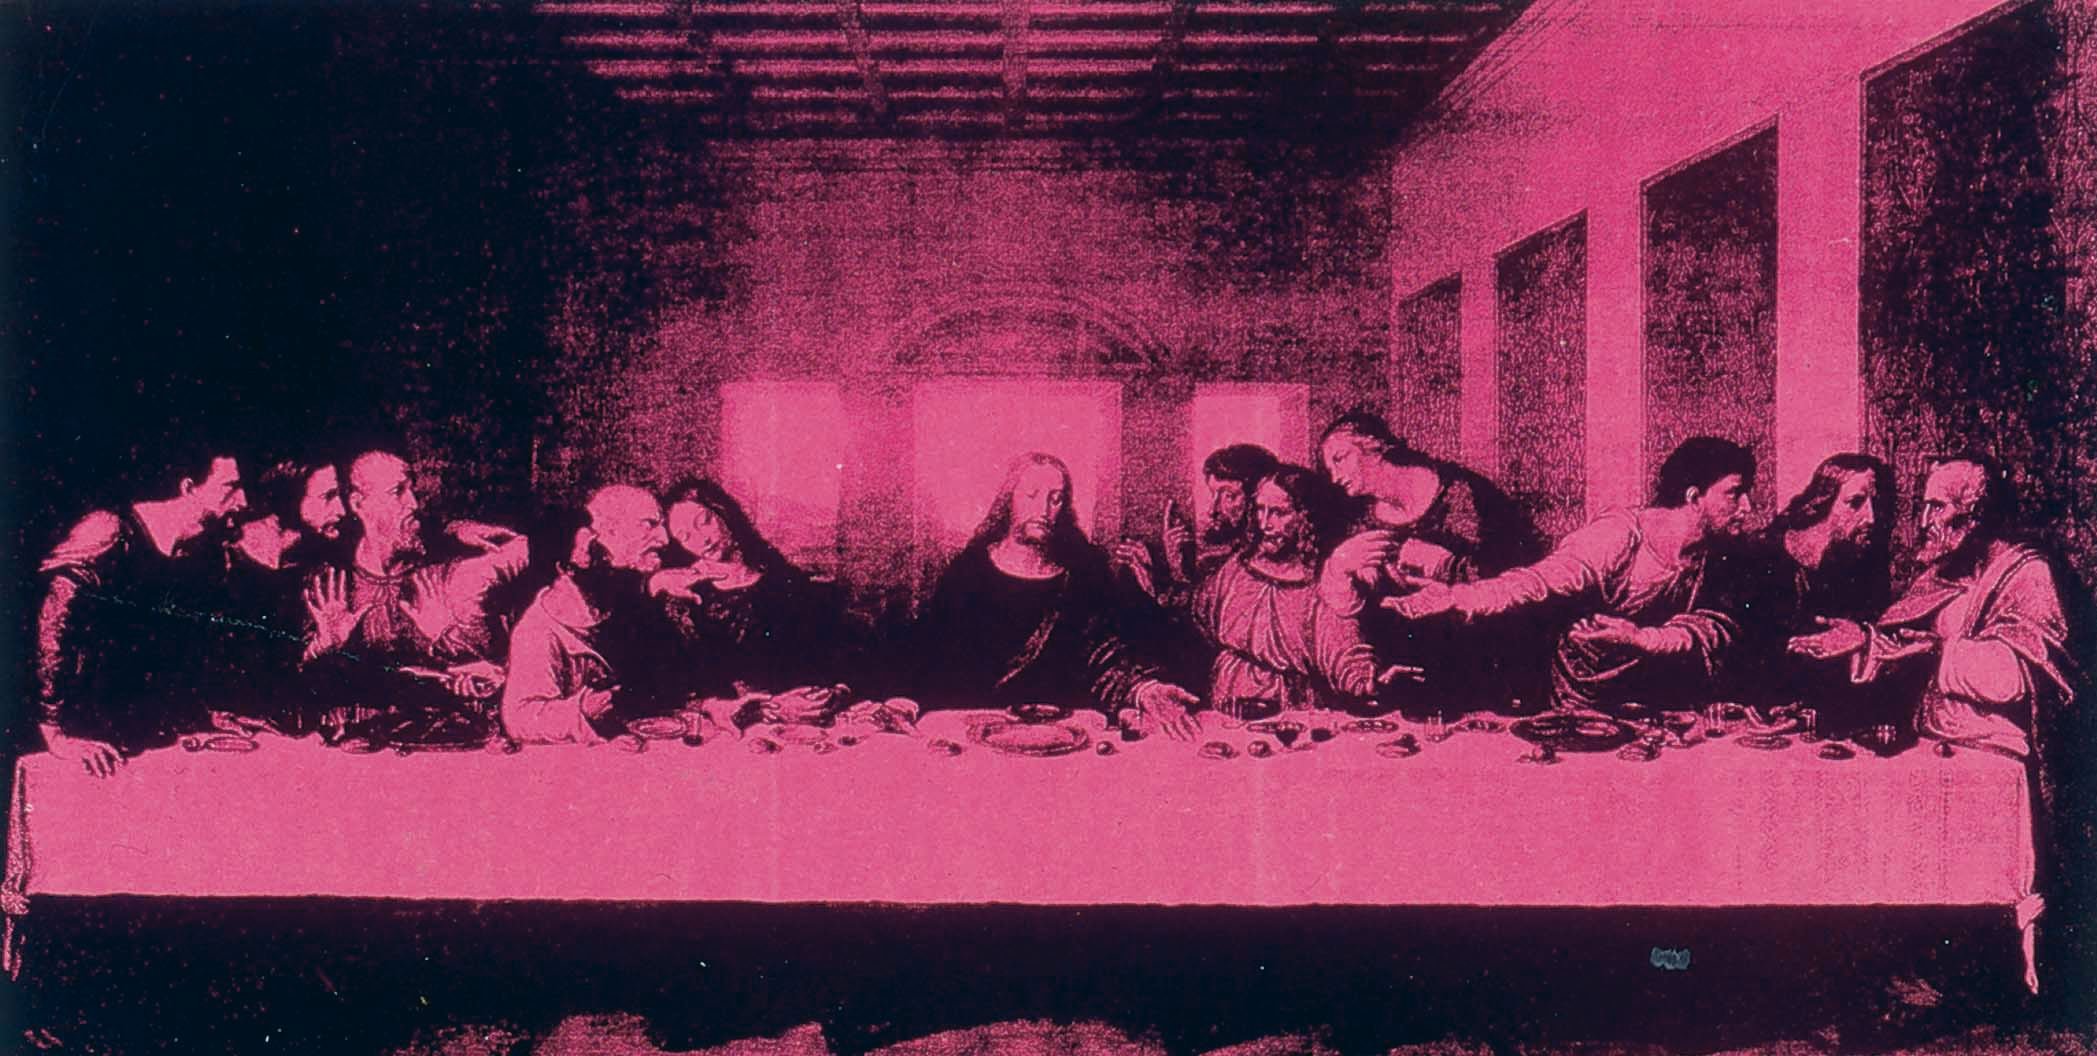 Andy Warhol - The Last Supper - 1986